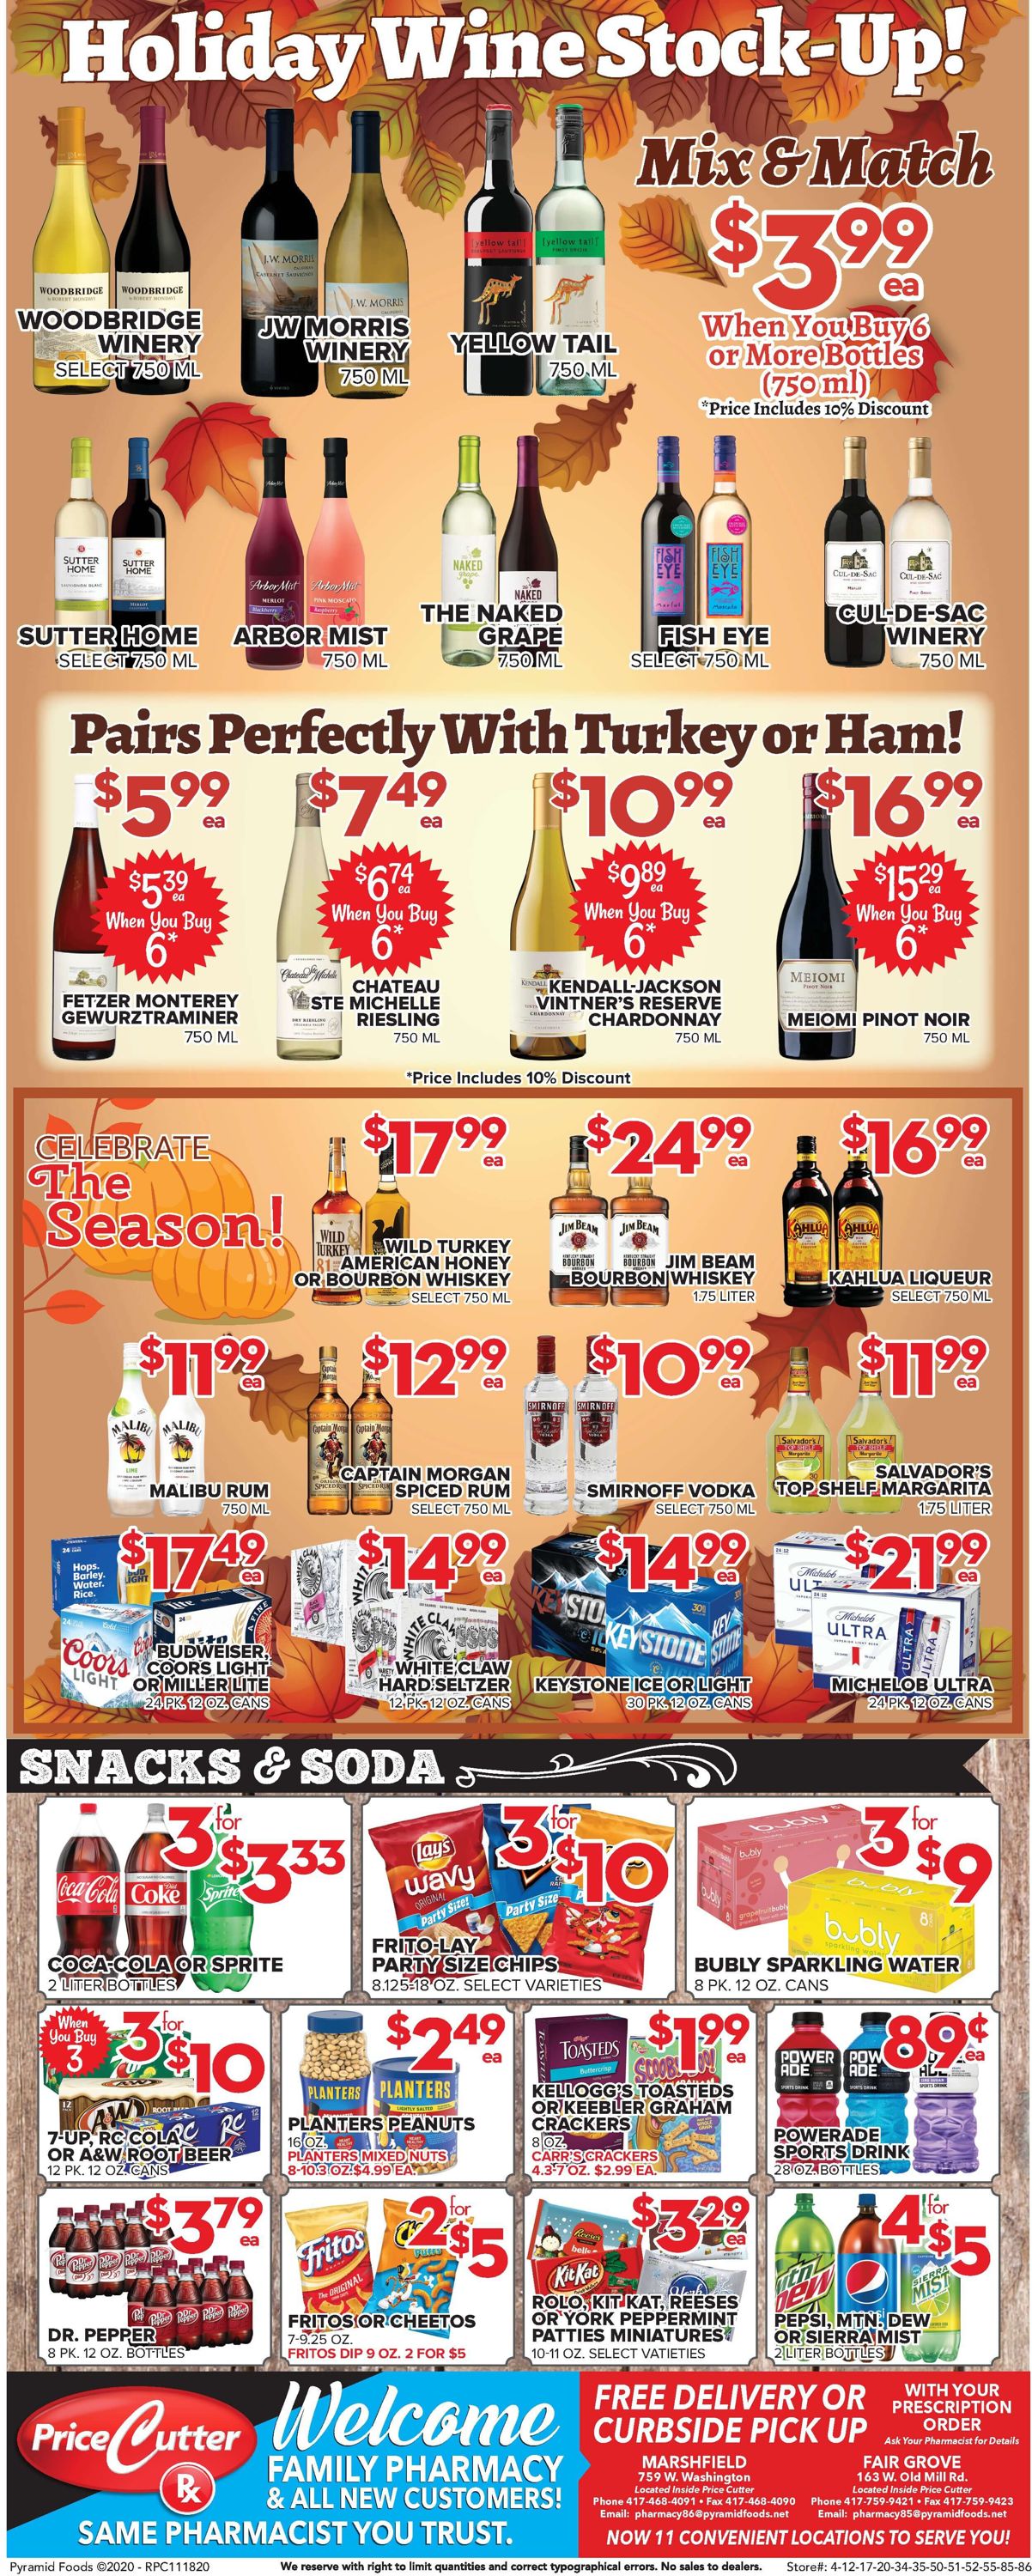 Price Cutter Thanksgiving ad 2020 Weekly Ad Circular - valid 11/18-11/26/2020 (Page 4)